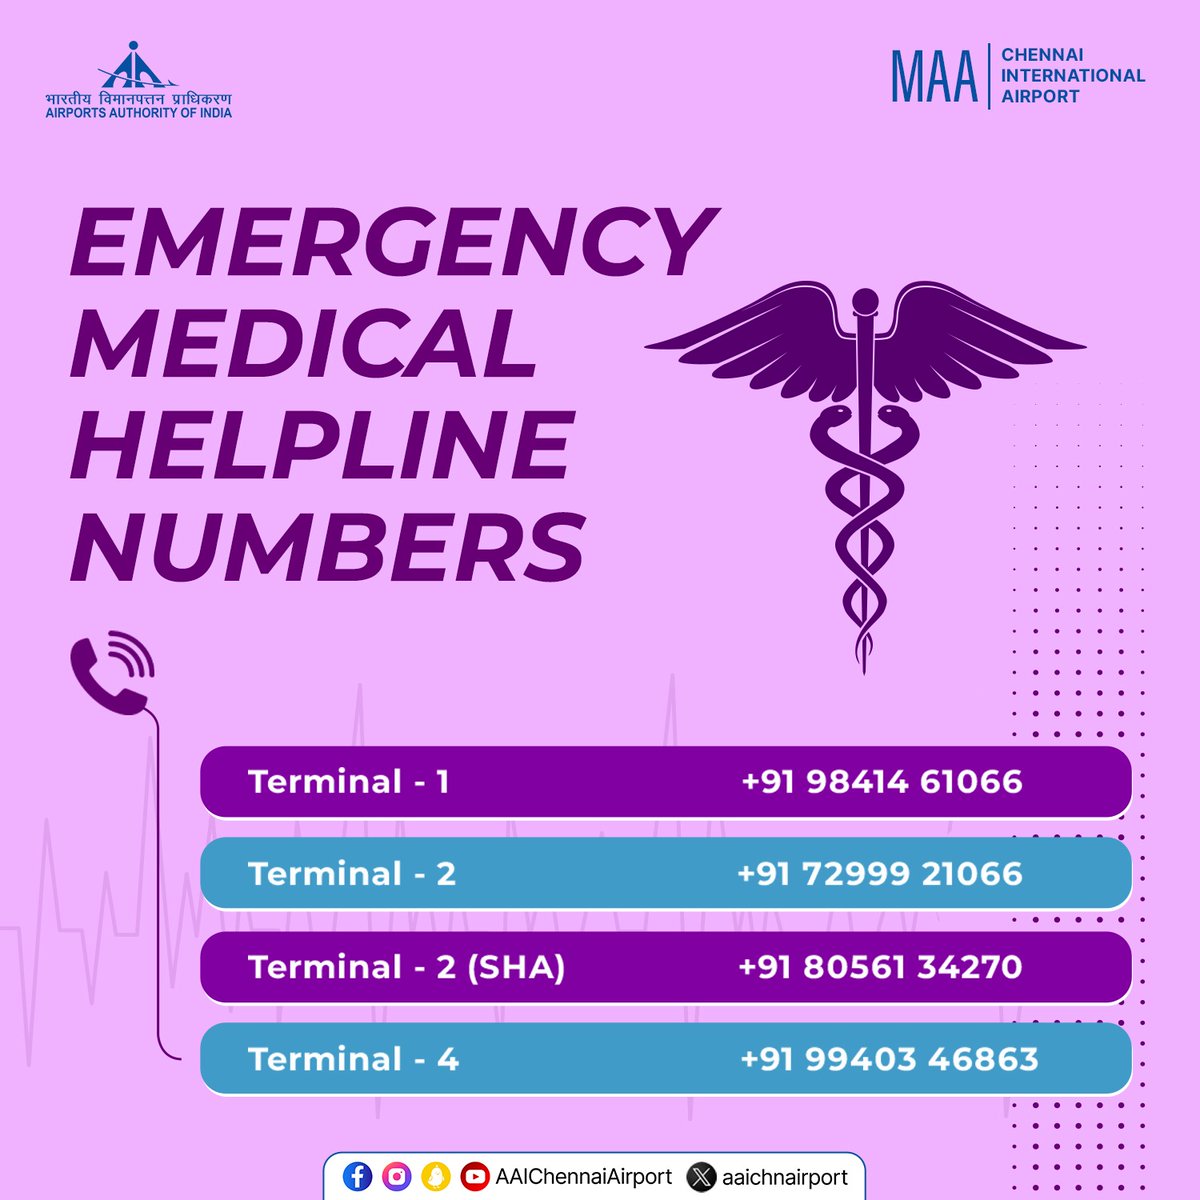 In need of urgent medical care at Chennai International Airport? Reach out promptly using these emergency contact numbers:

Terminal - 1 9841461066
Terminal - 2 7299921066
Terminal - 2 (SHA) 8056134270
Terminal - 4 9940346863

#ChennaiAirport #AAIcares 

@AAI_Official | @MoCA_GoI